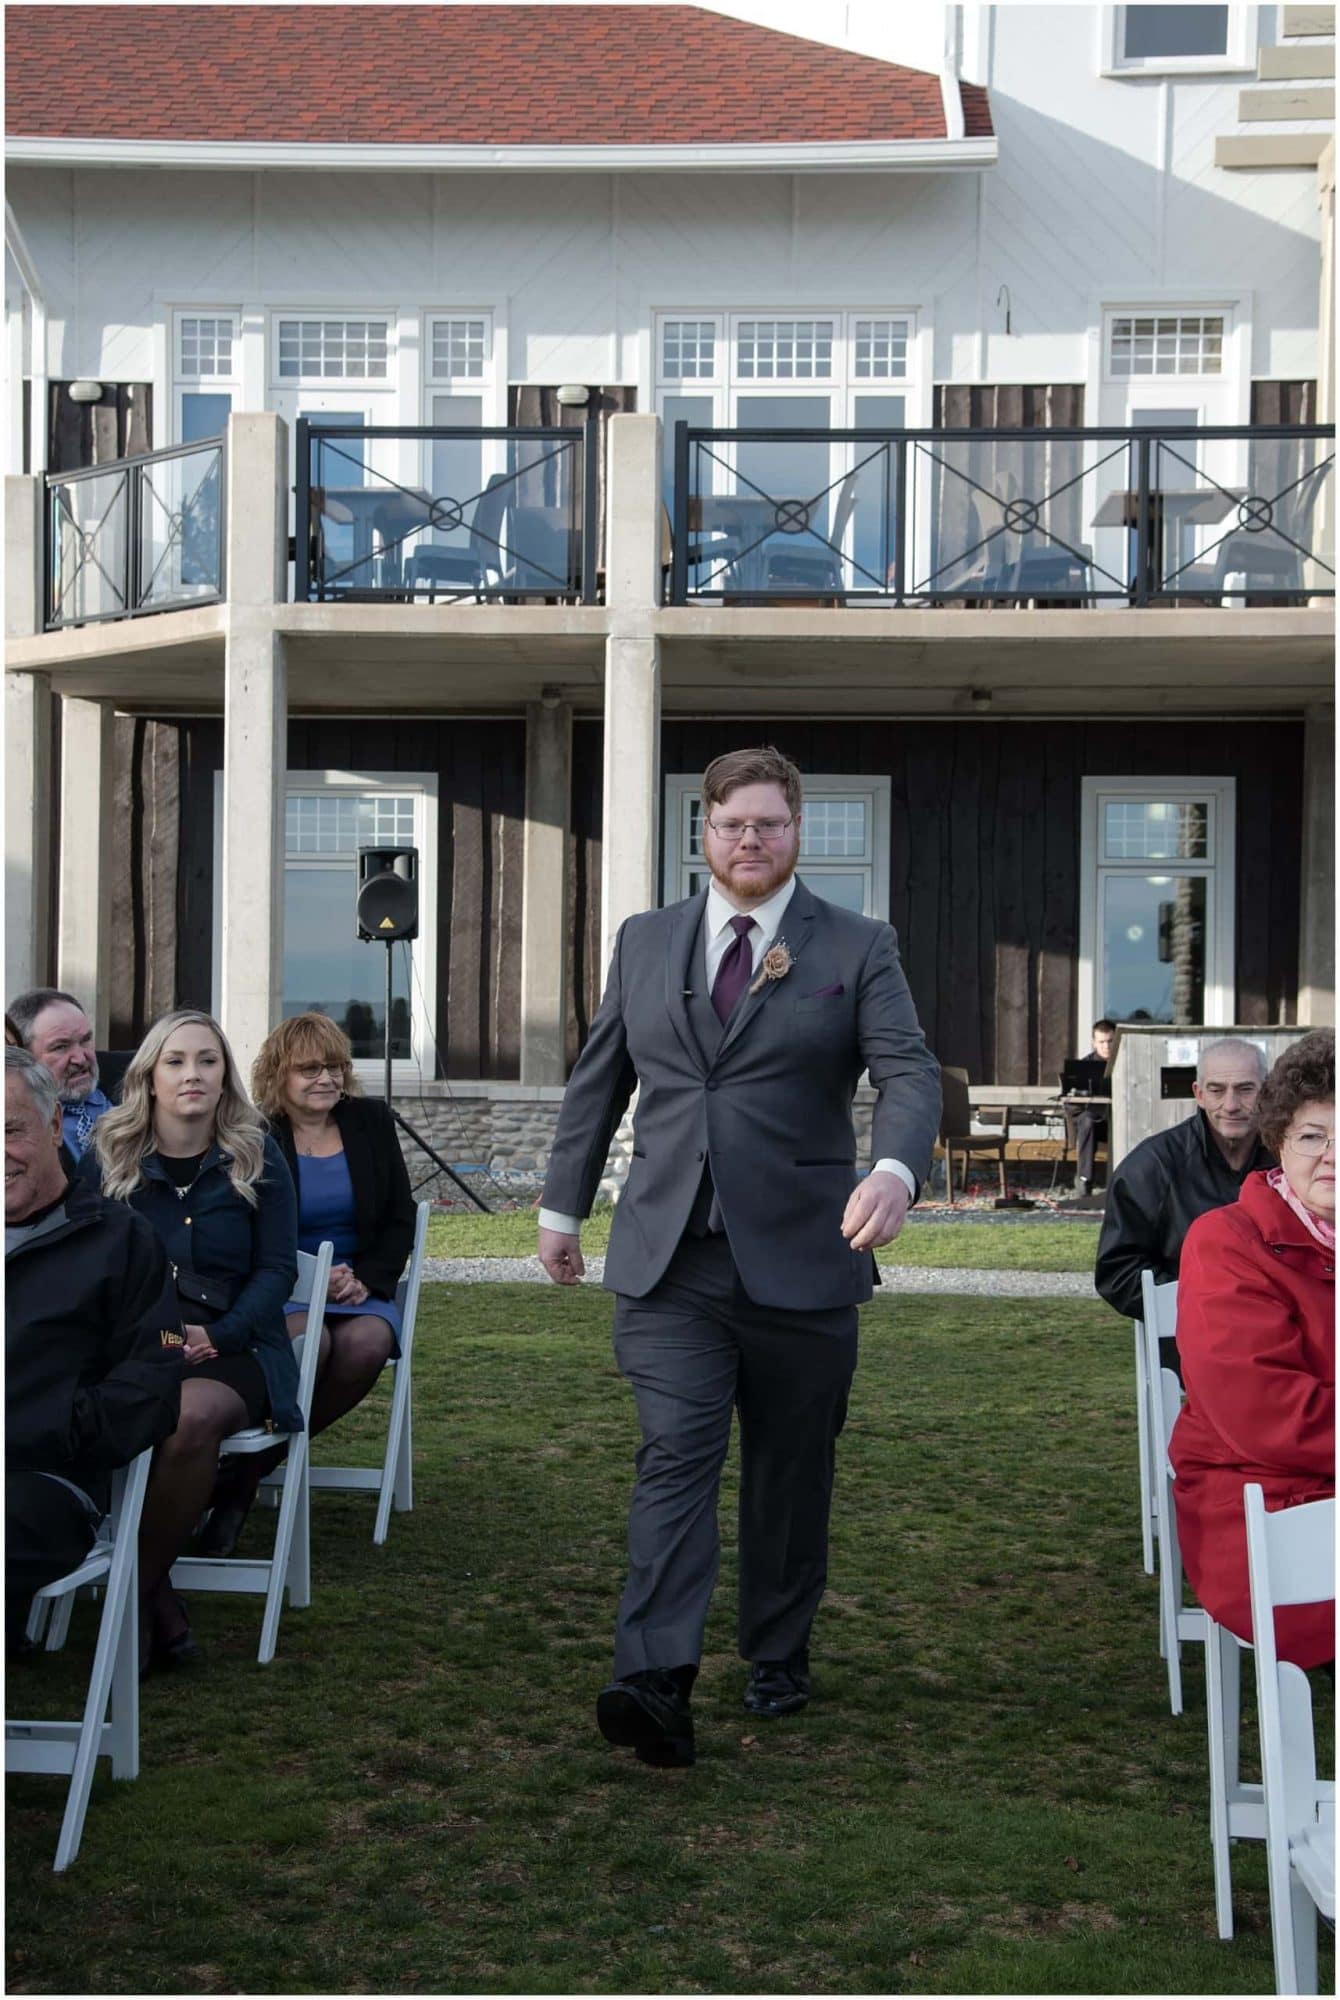 The groom walks up the aisle to the alter for his wedding ceremony at White Point Beach Resort in NS.